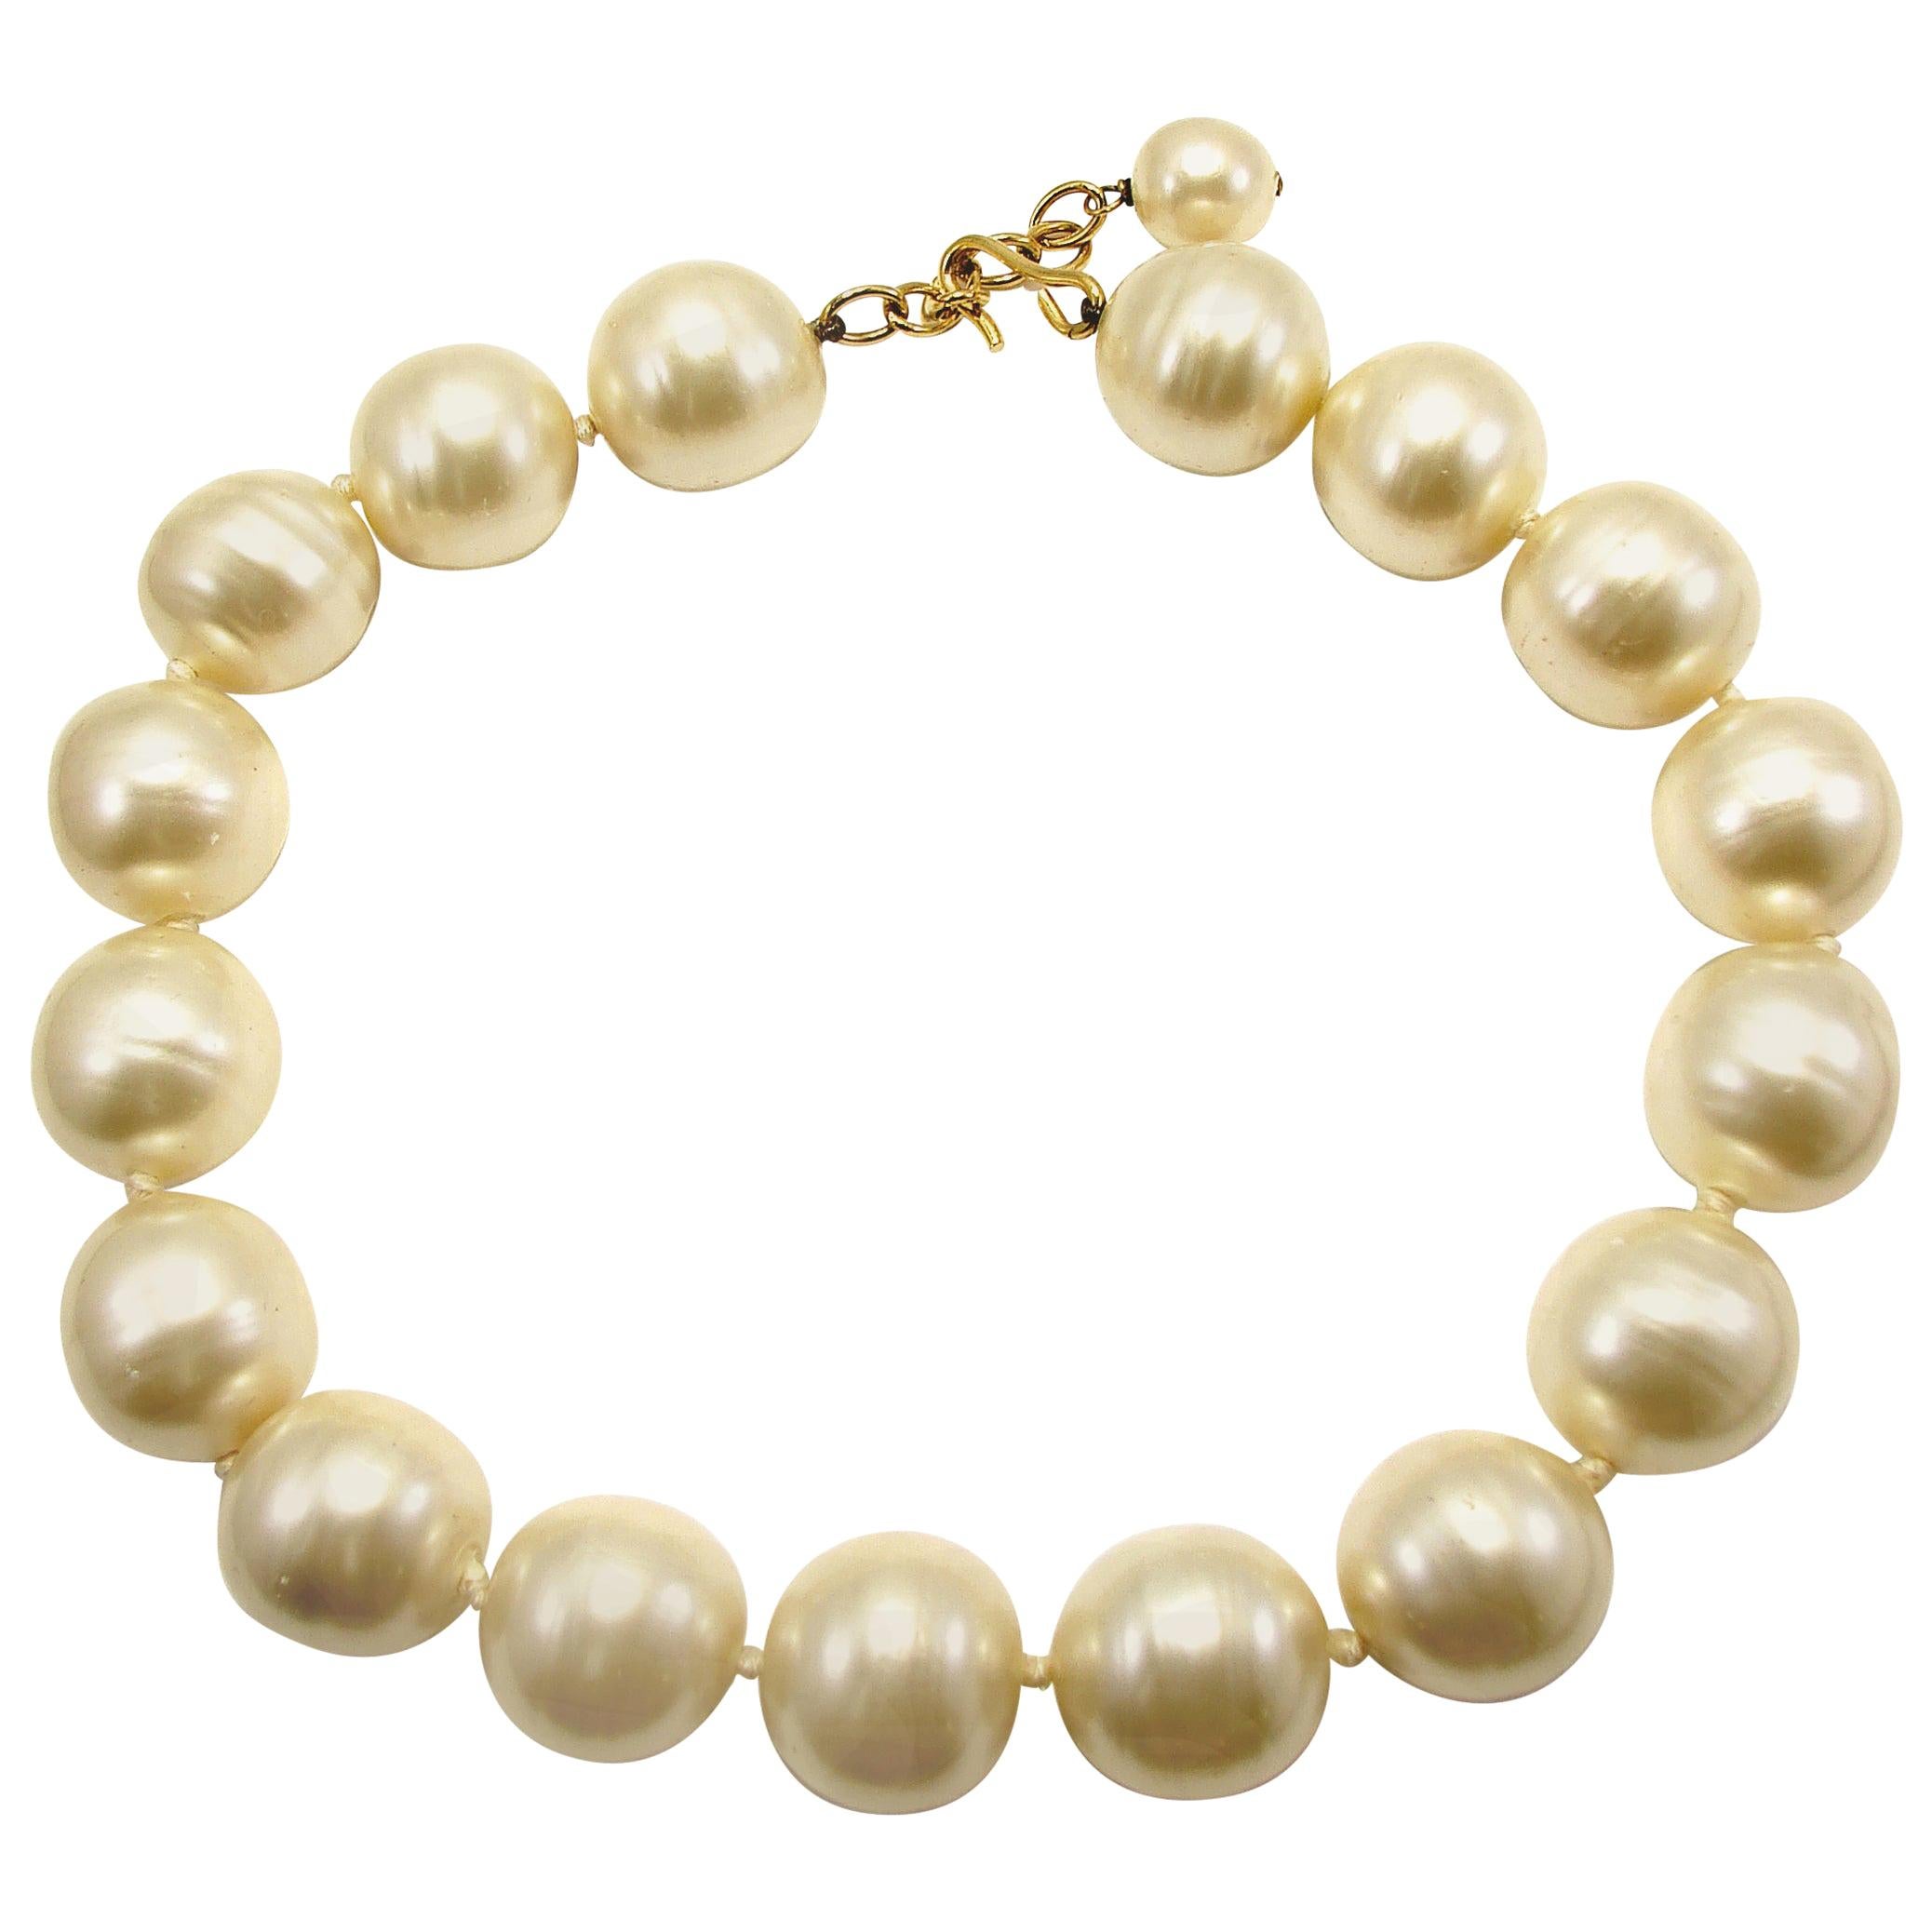 Chanel Choker Necklace Baroque Pearls Poured Glass 90s Season 2 9 